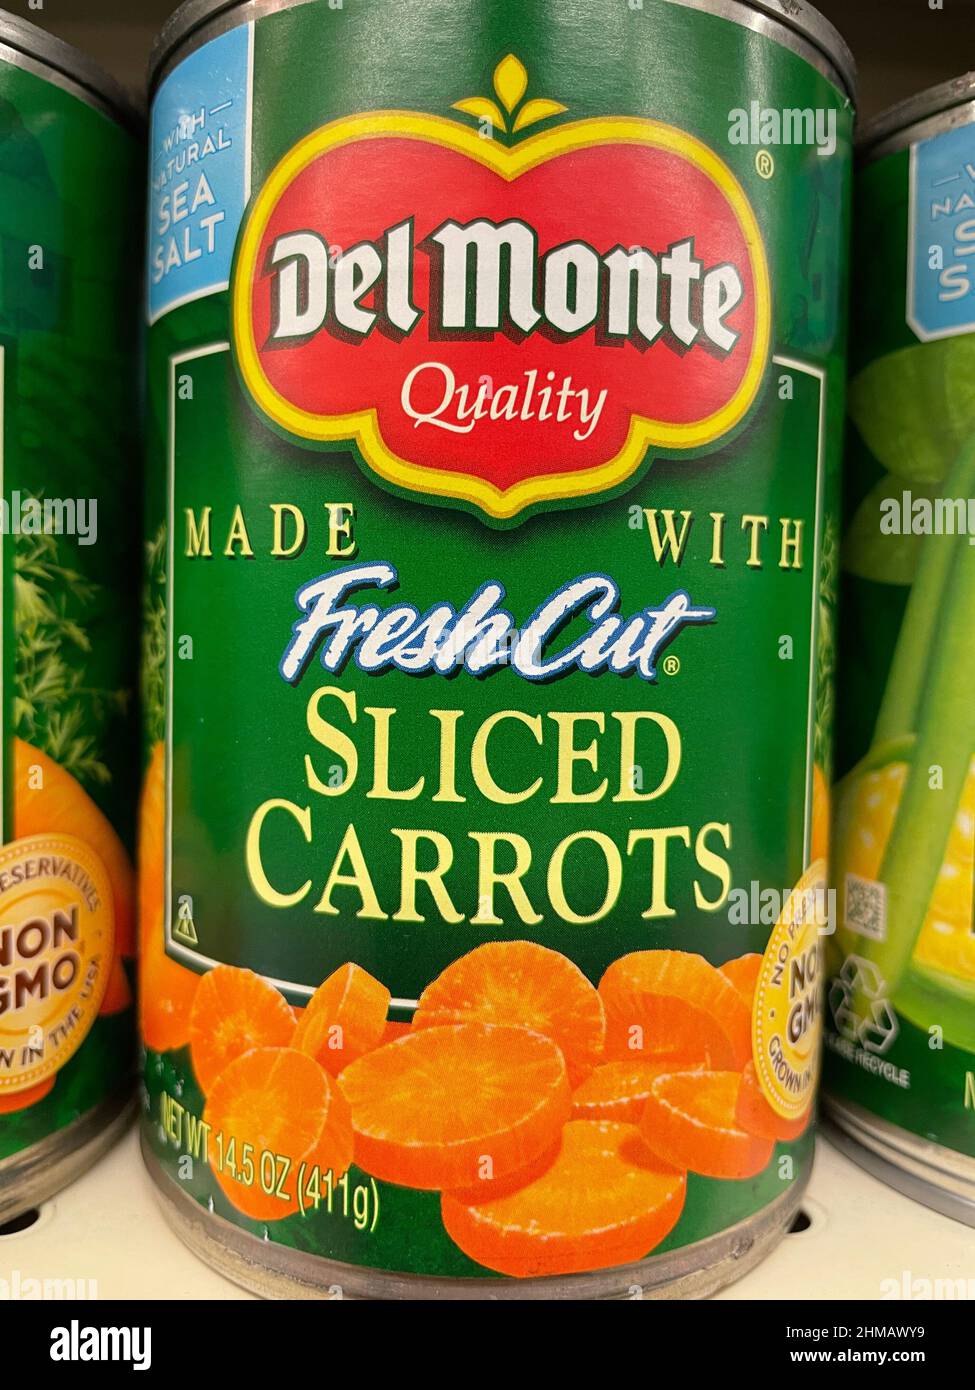 Grovetown, Ga USA - 01 01 22: Retail Grocery store shelves Delmonte canned carrots sliced Stock Photo